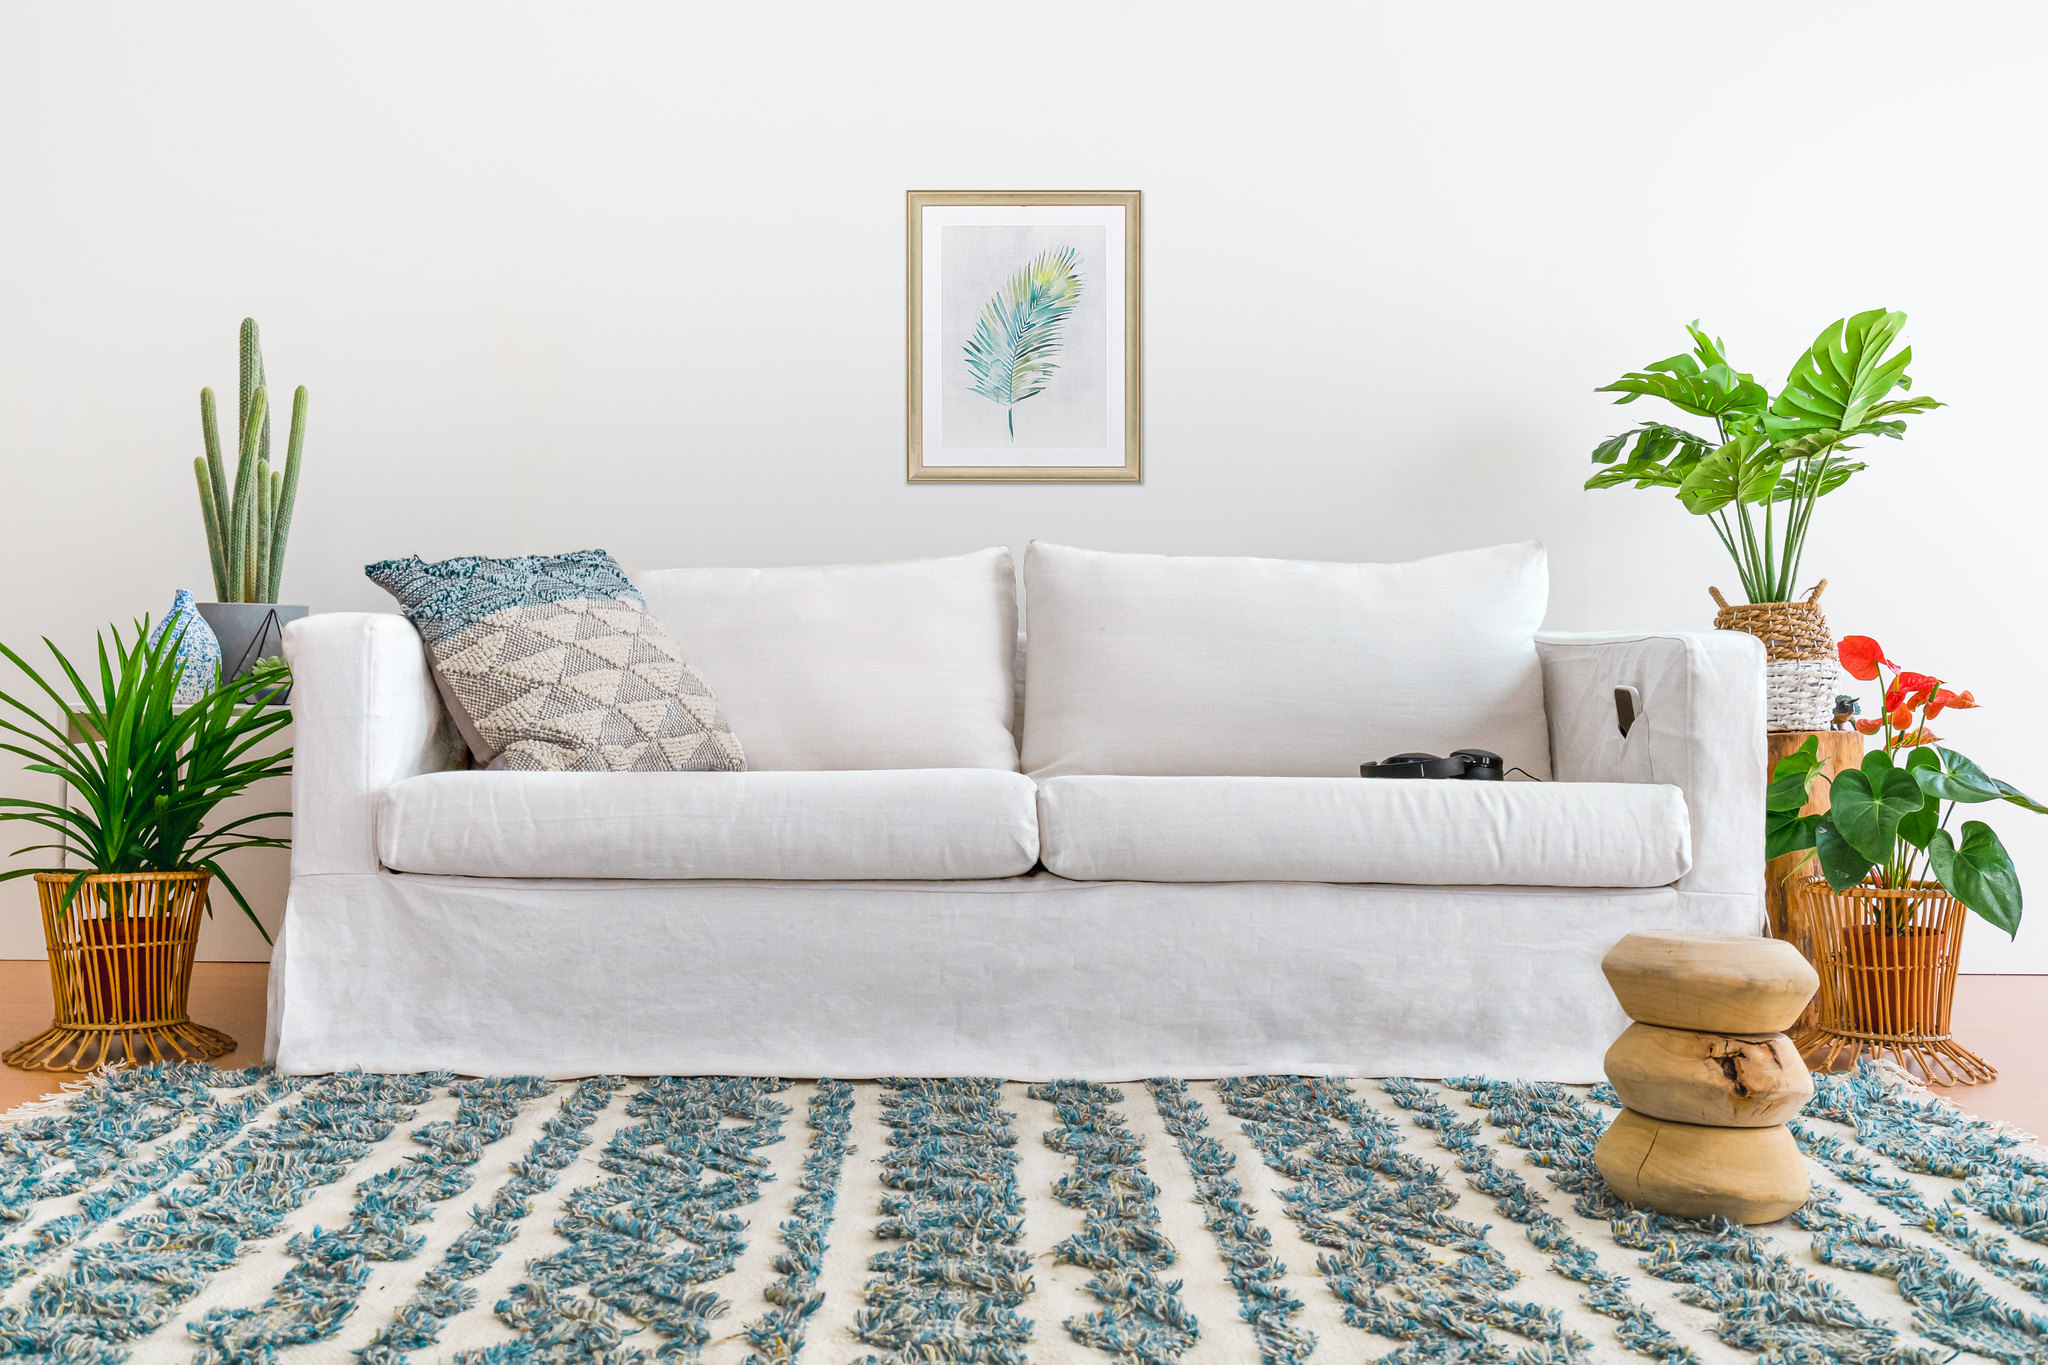 Steps to choose the right couch covers for your home